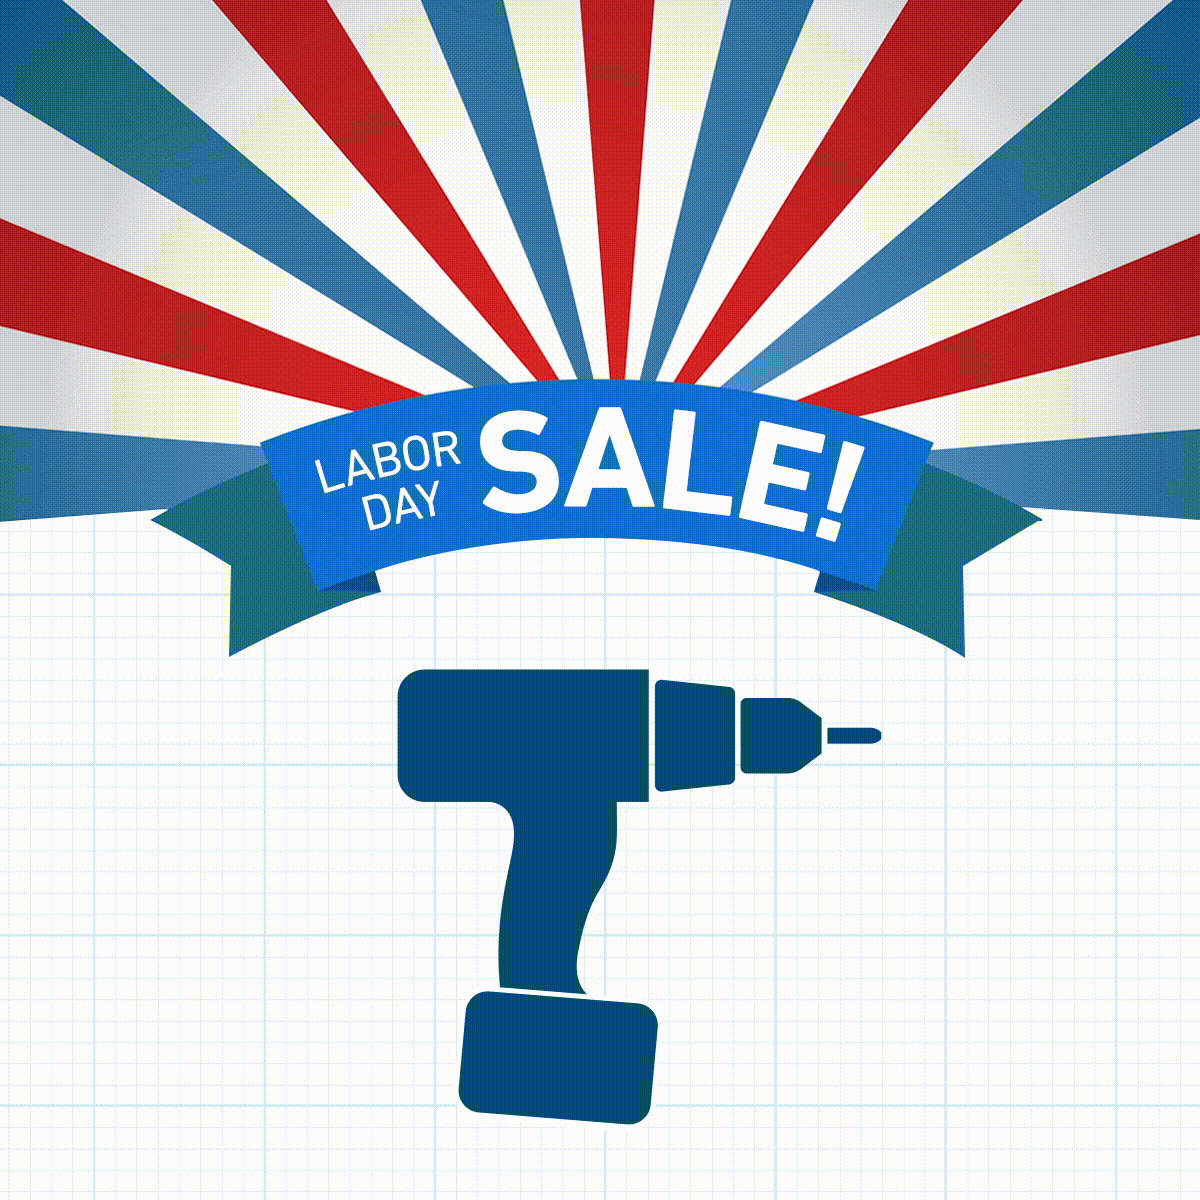 The DIY Labor Day Sales You Can’t Afford to Miss